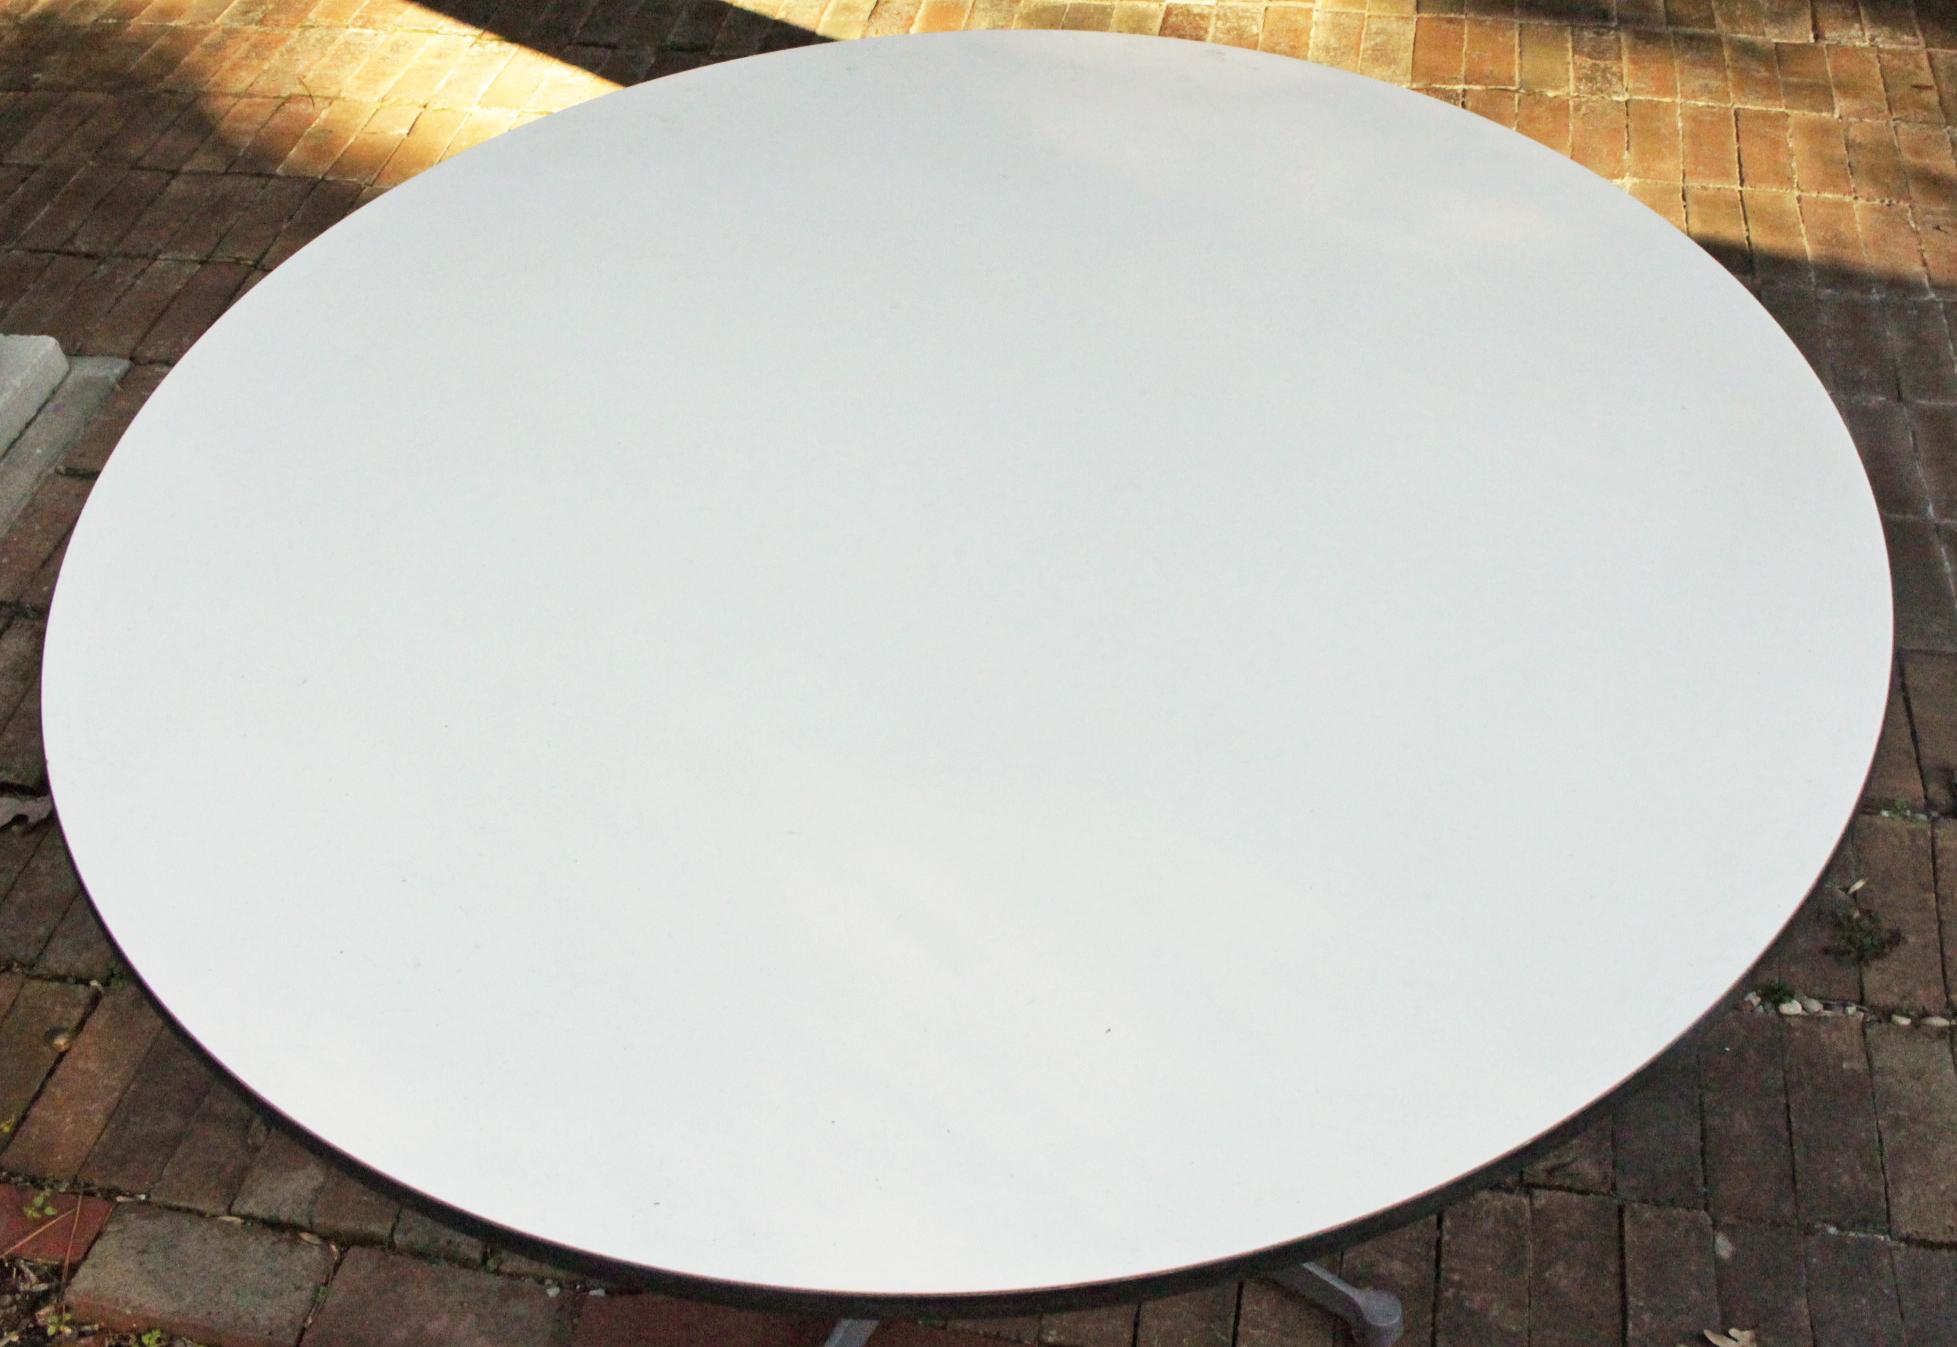 Mid-Century Modern Circa 1960s-70s American Circular Table by Herman Miller For Sale